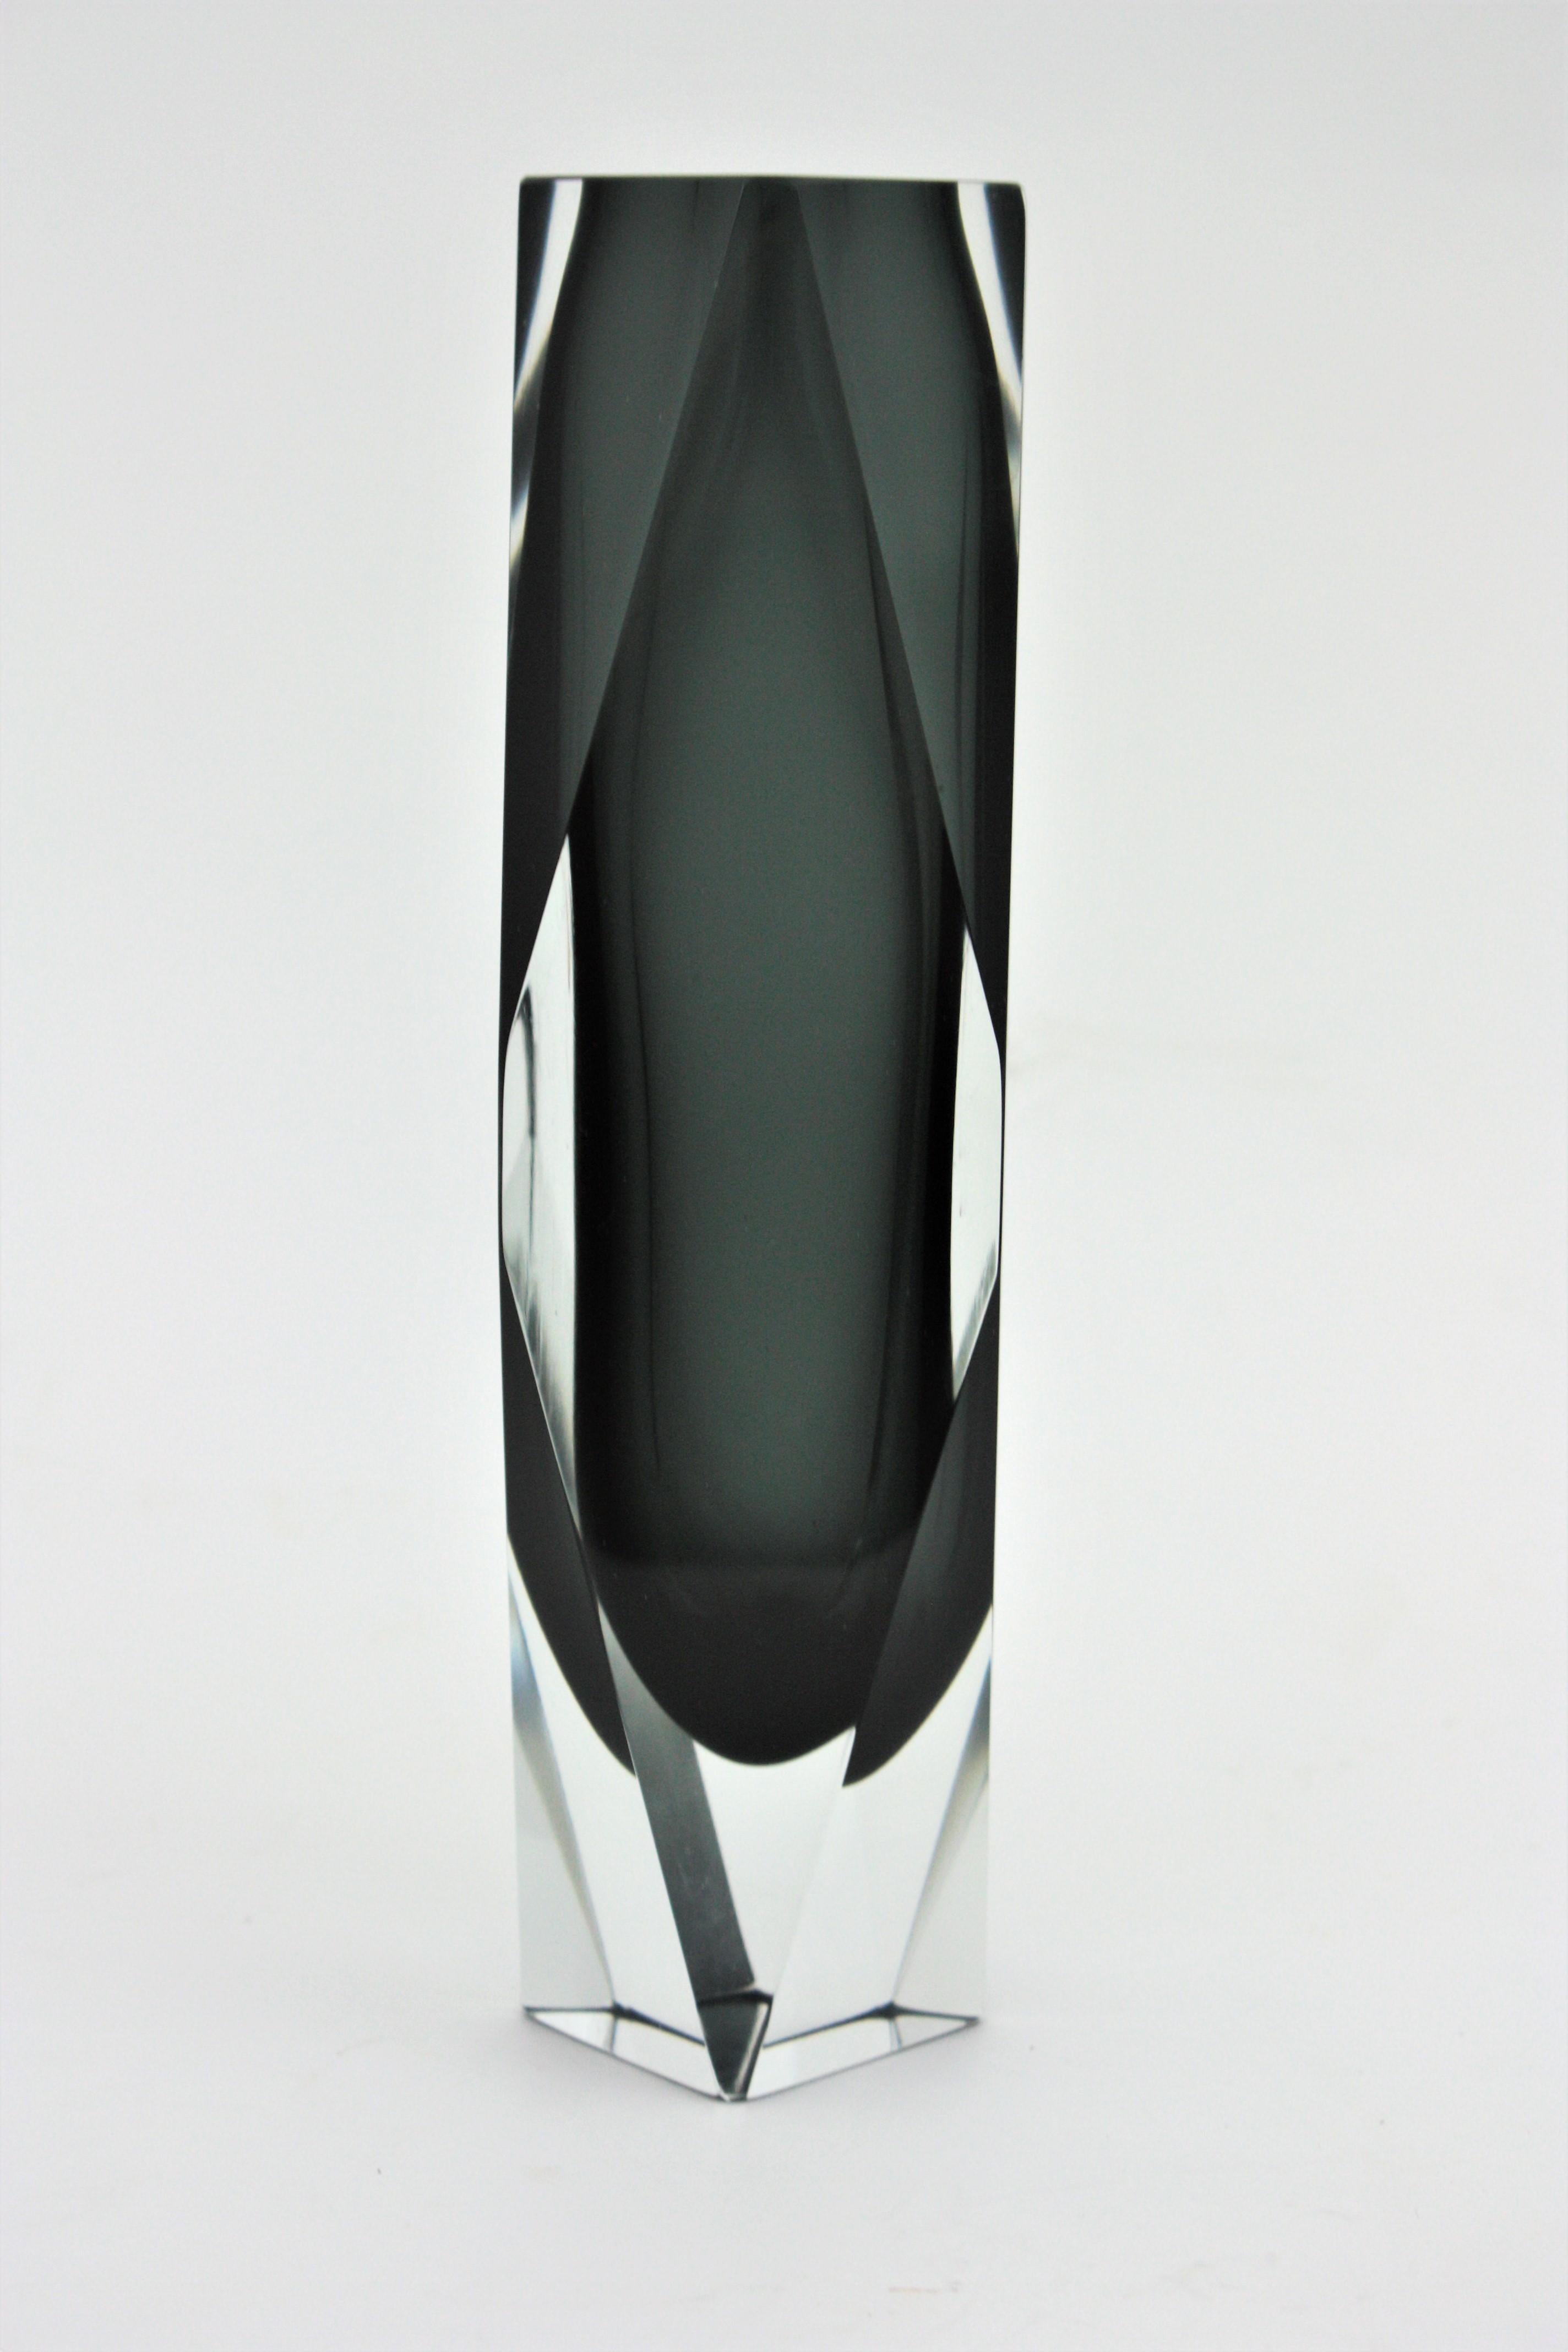 Giant Mandruzzato Murano Sommerso Smoked Grey Clear Faceted Art Glass Vase For Sale 2